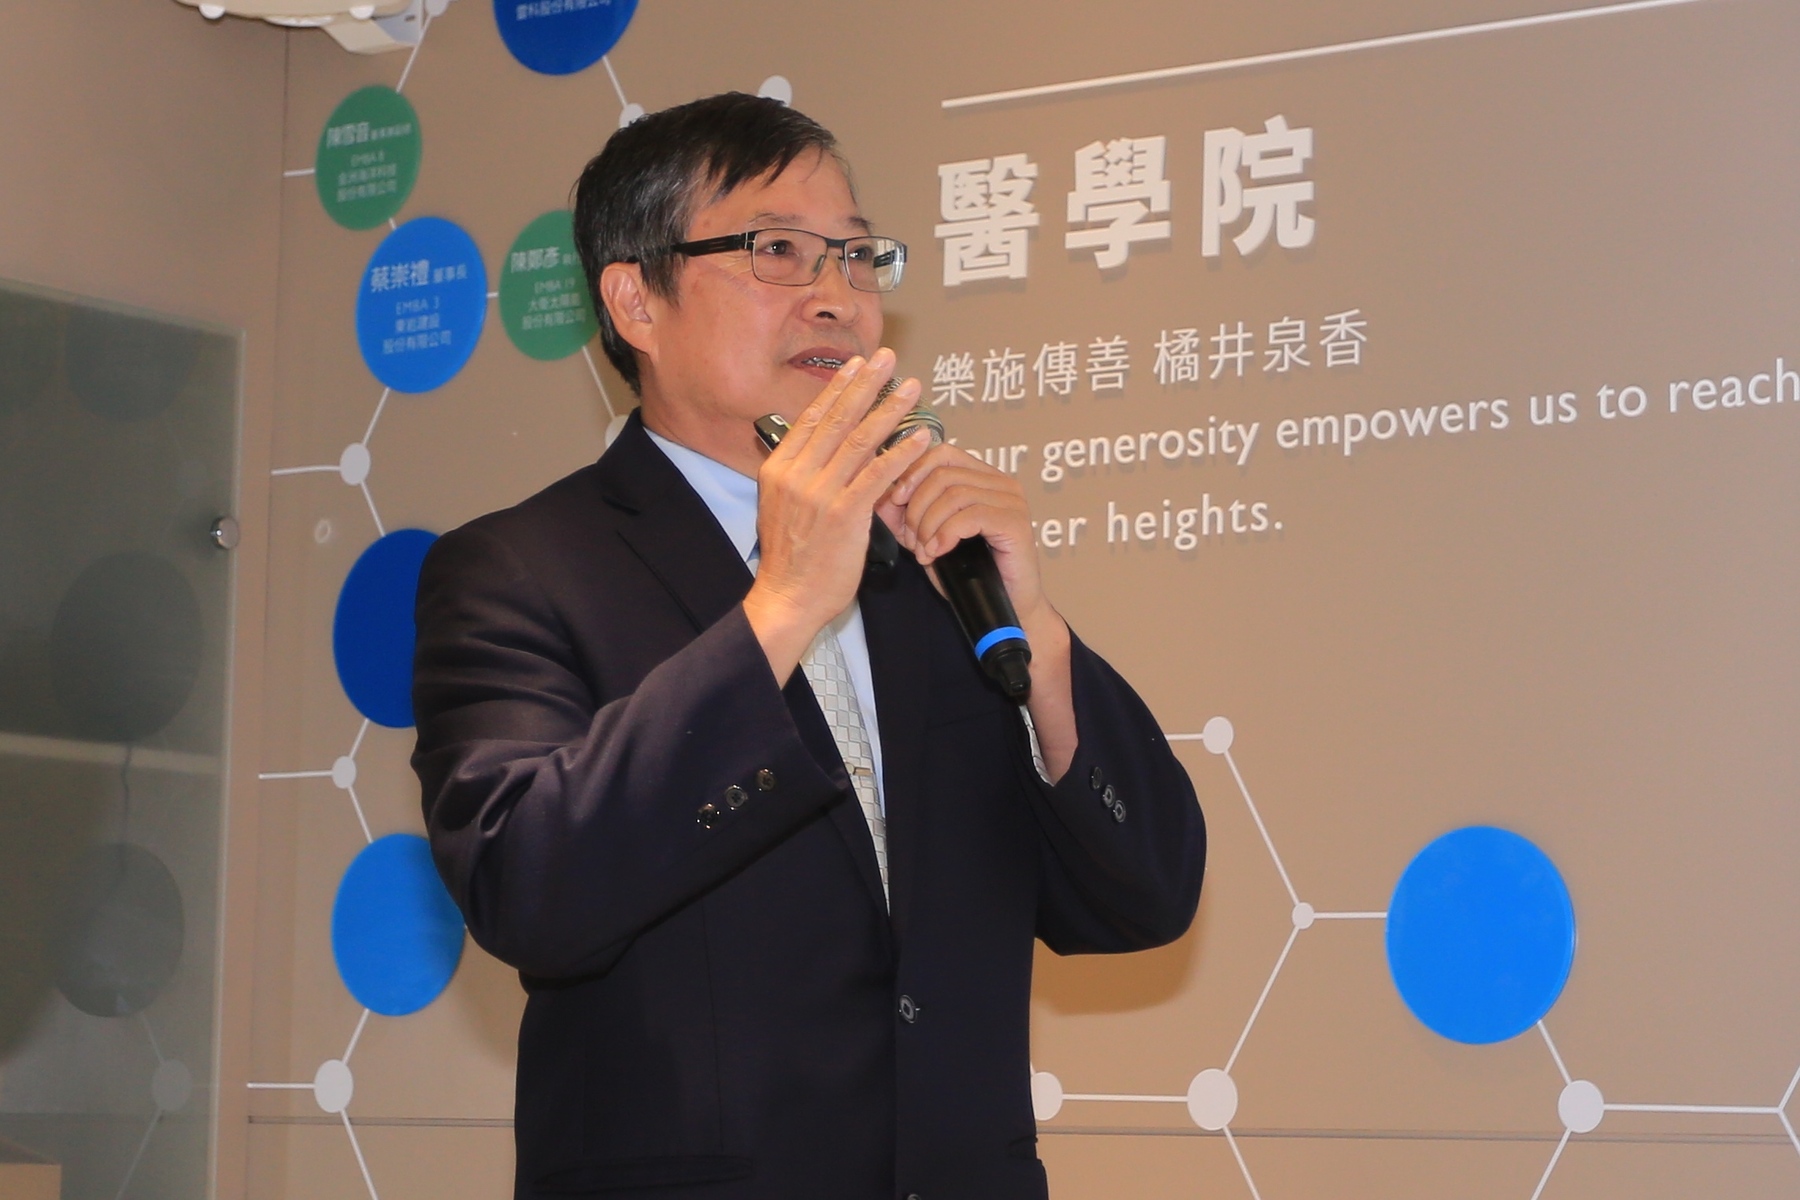 Professor Ming-Lung Yu, the Senior Vice President and Dean of the College of Medicine at NSYSU, presented a briefing on progress made by the College during its first year.